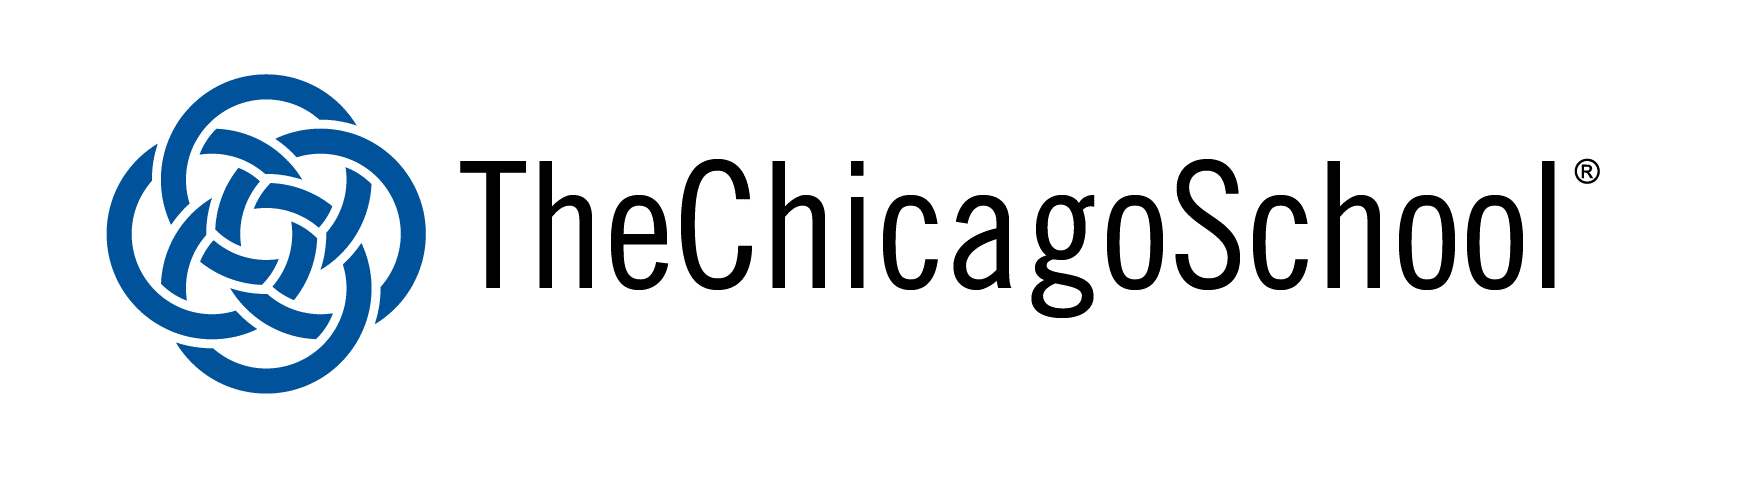 Ph.D. in Counselor Education and Supervision Program at The Chicago School of Professional Psychology